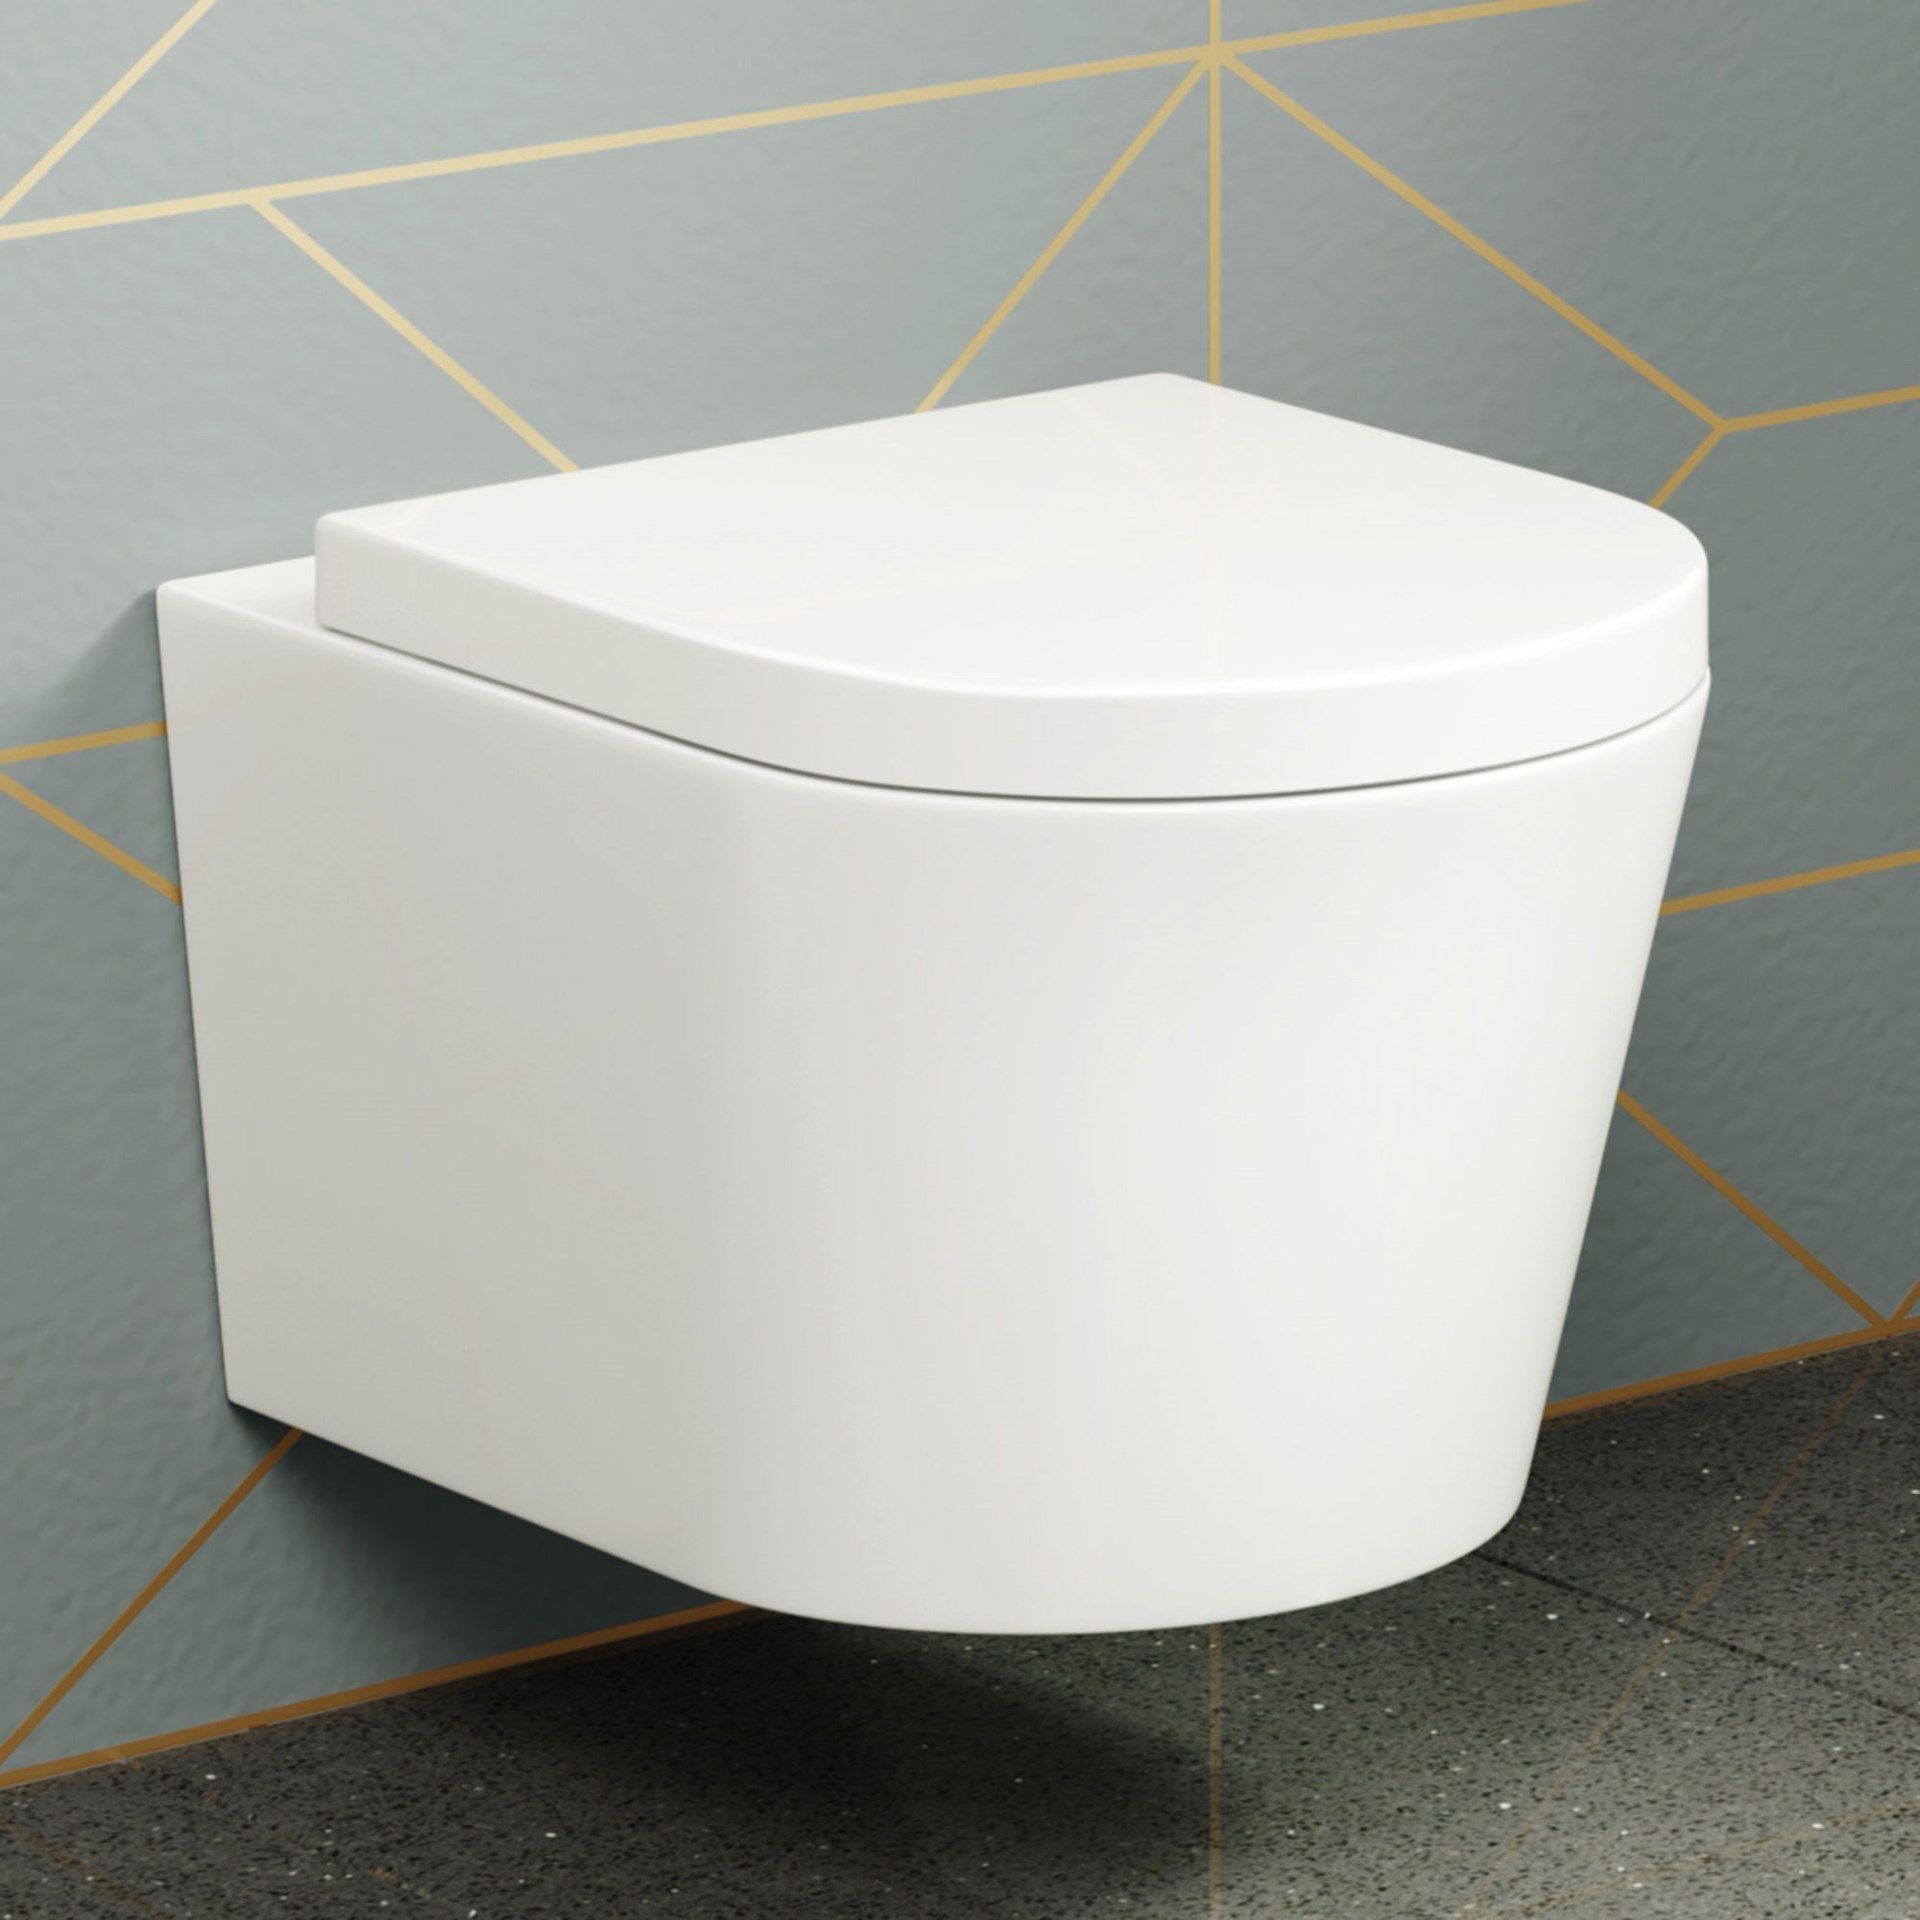 BRAND NEW BOXED Lyon II Wall Hung Toilet inc Luxury Soft Close Seat.RRP £349.99 each. We love this